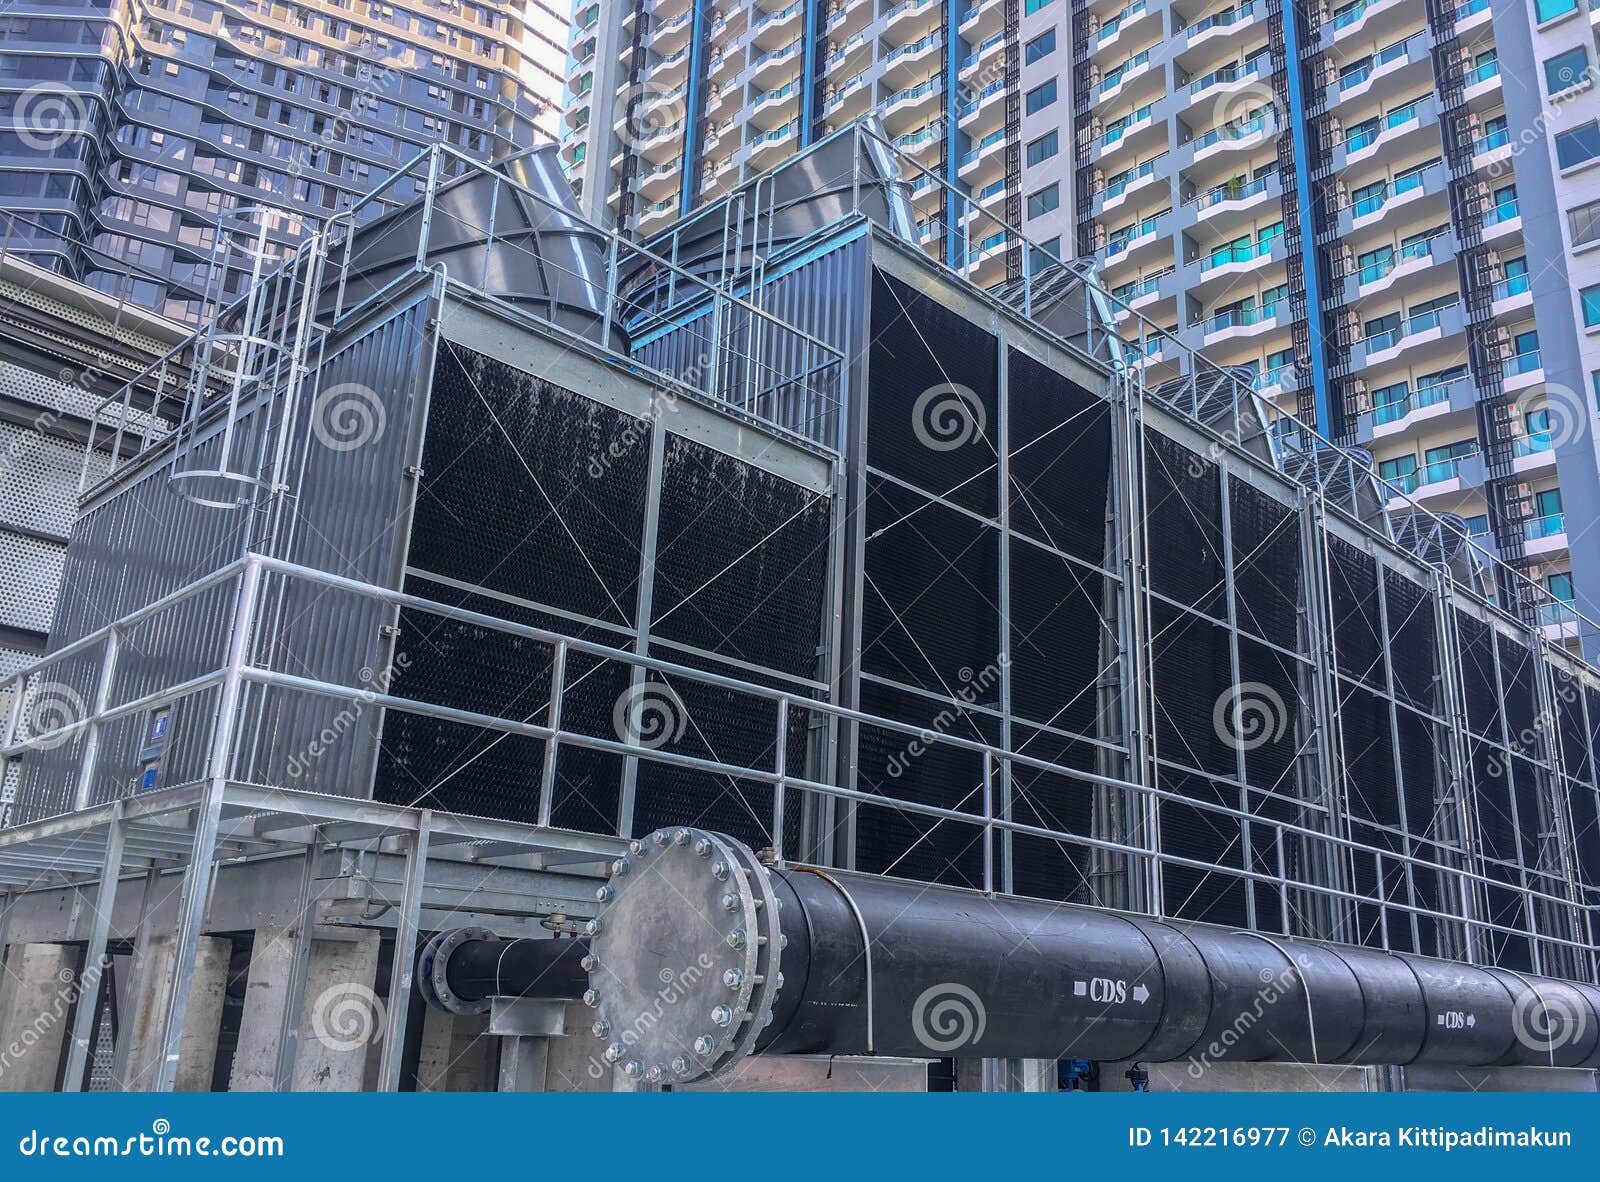 cooling towers with a pipe install on the rooftop of building